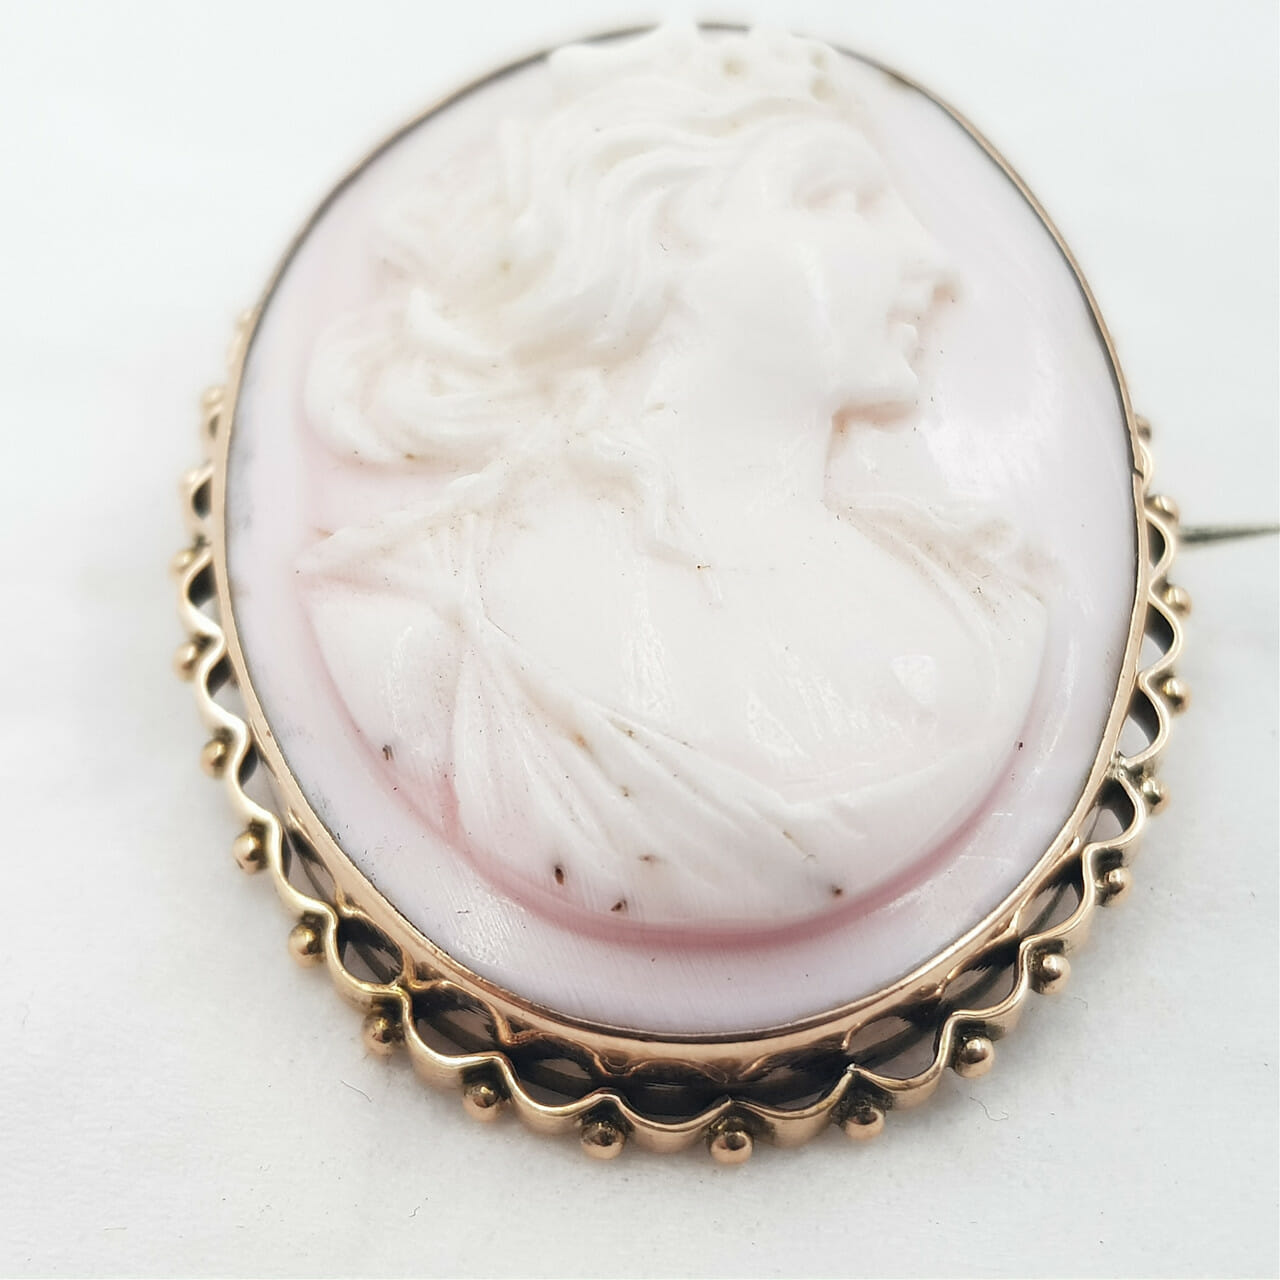 9CT 9.8GR YELLOW GOLD CAMEO BROOCH PIN OR PENDANT #47470